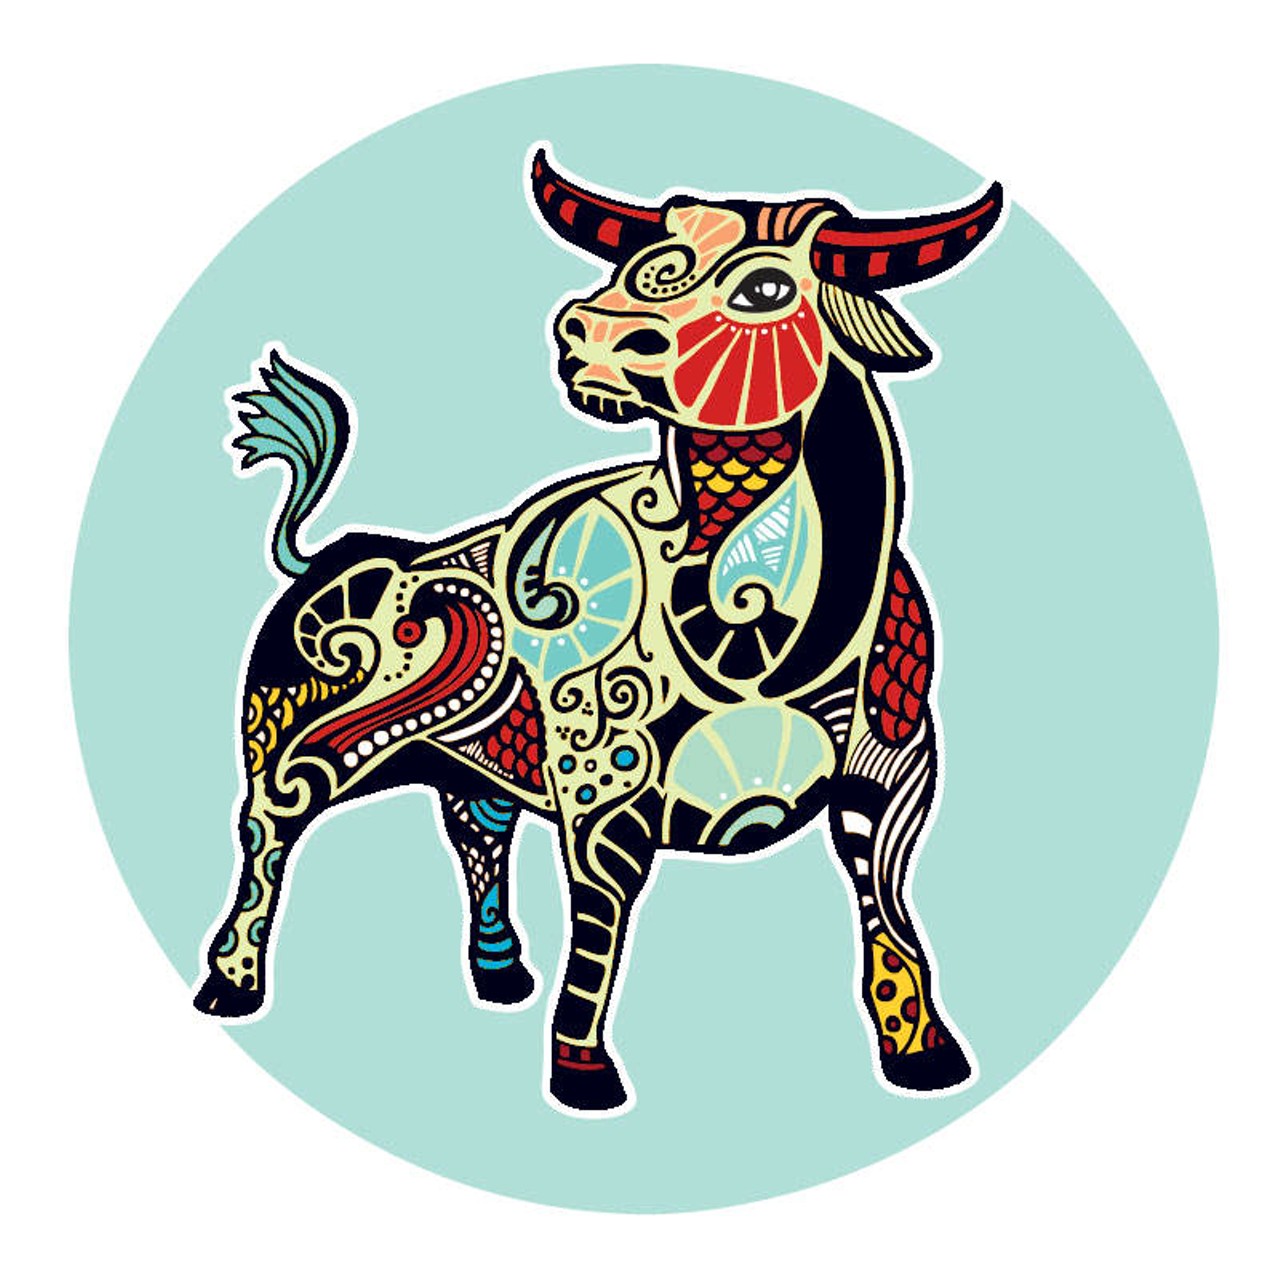 TAURUS (April 21 -May 20):
A lifetime of keeping it all together on the surface has met its limit. Until now you were under the impression that perfection lies in whatever the rest of the world calls "normal." As the past &#151; and your experience of it &#151; leak through the cracks, you are confronting the truth and your own uniqueness for the very first time. Others find it so hard to embrace the real you; they are pushing to keep you right where you are. Issues that revolve around showing your true colors will show you who's there for you and who's not. Don't cave in to expectations. Focus on what matters to you.